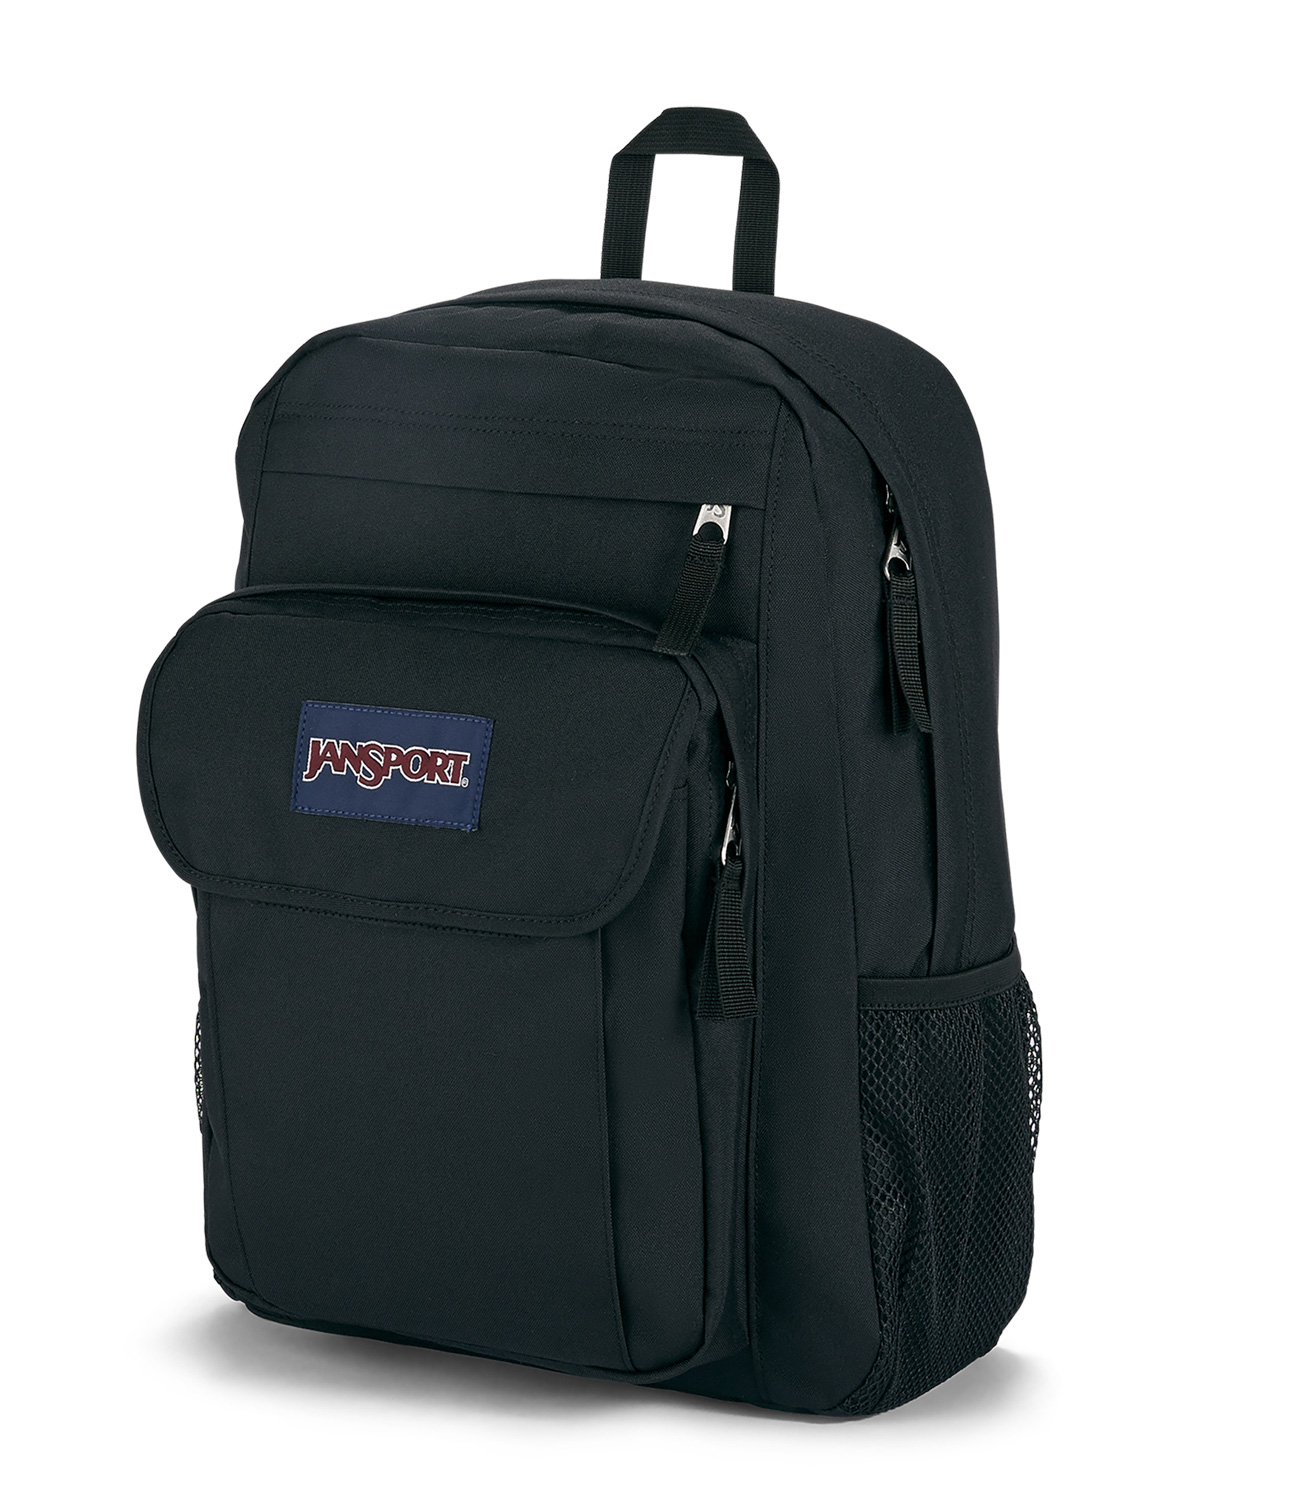 Buy UNION PACK BACKPACK Bag from JanSport Aus